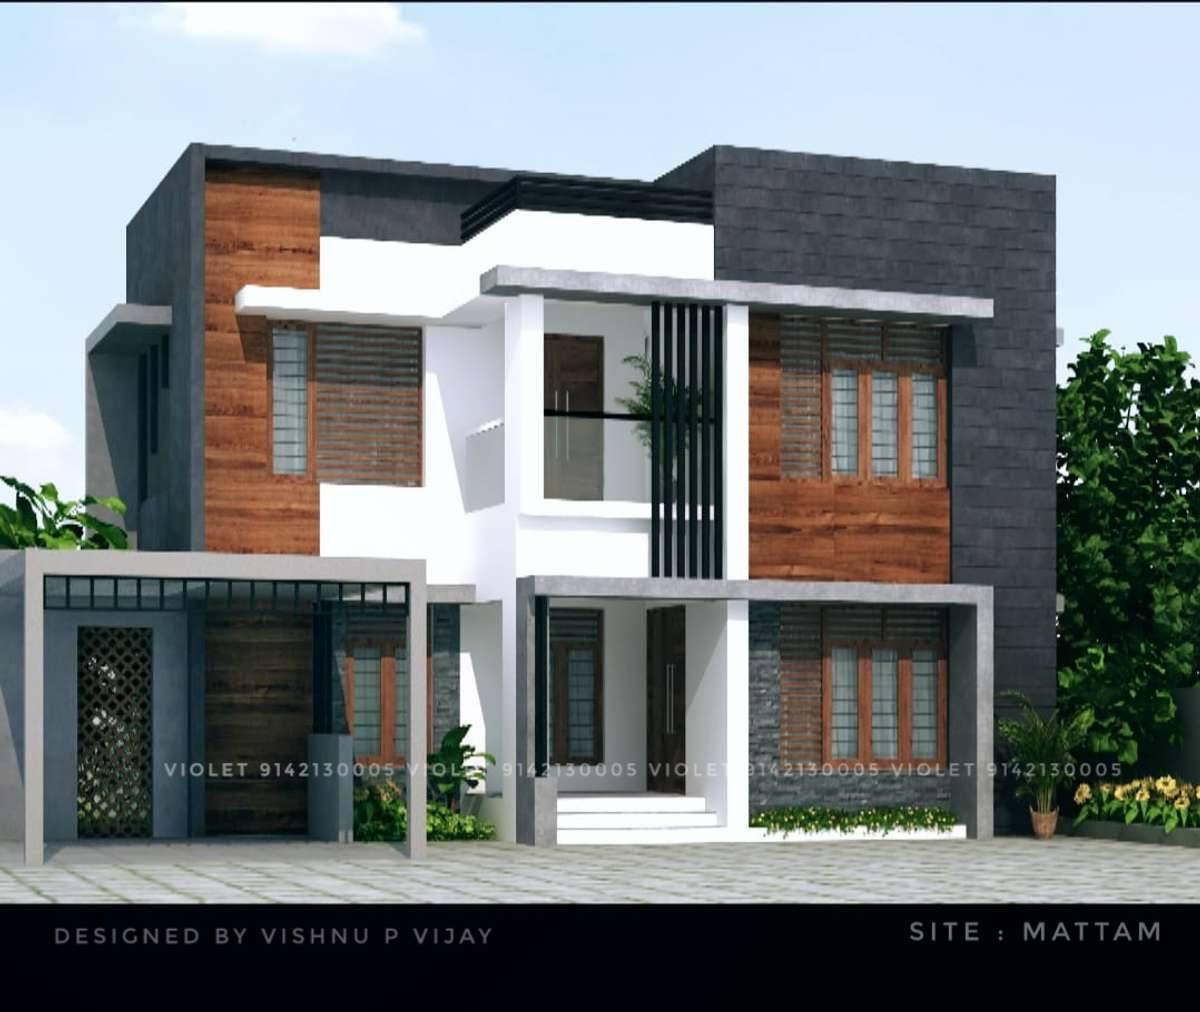 Ongoing project at thrissur
#KeralaStyleHouse #ContemporaryHouse